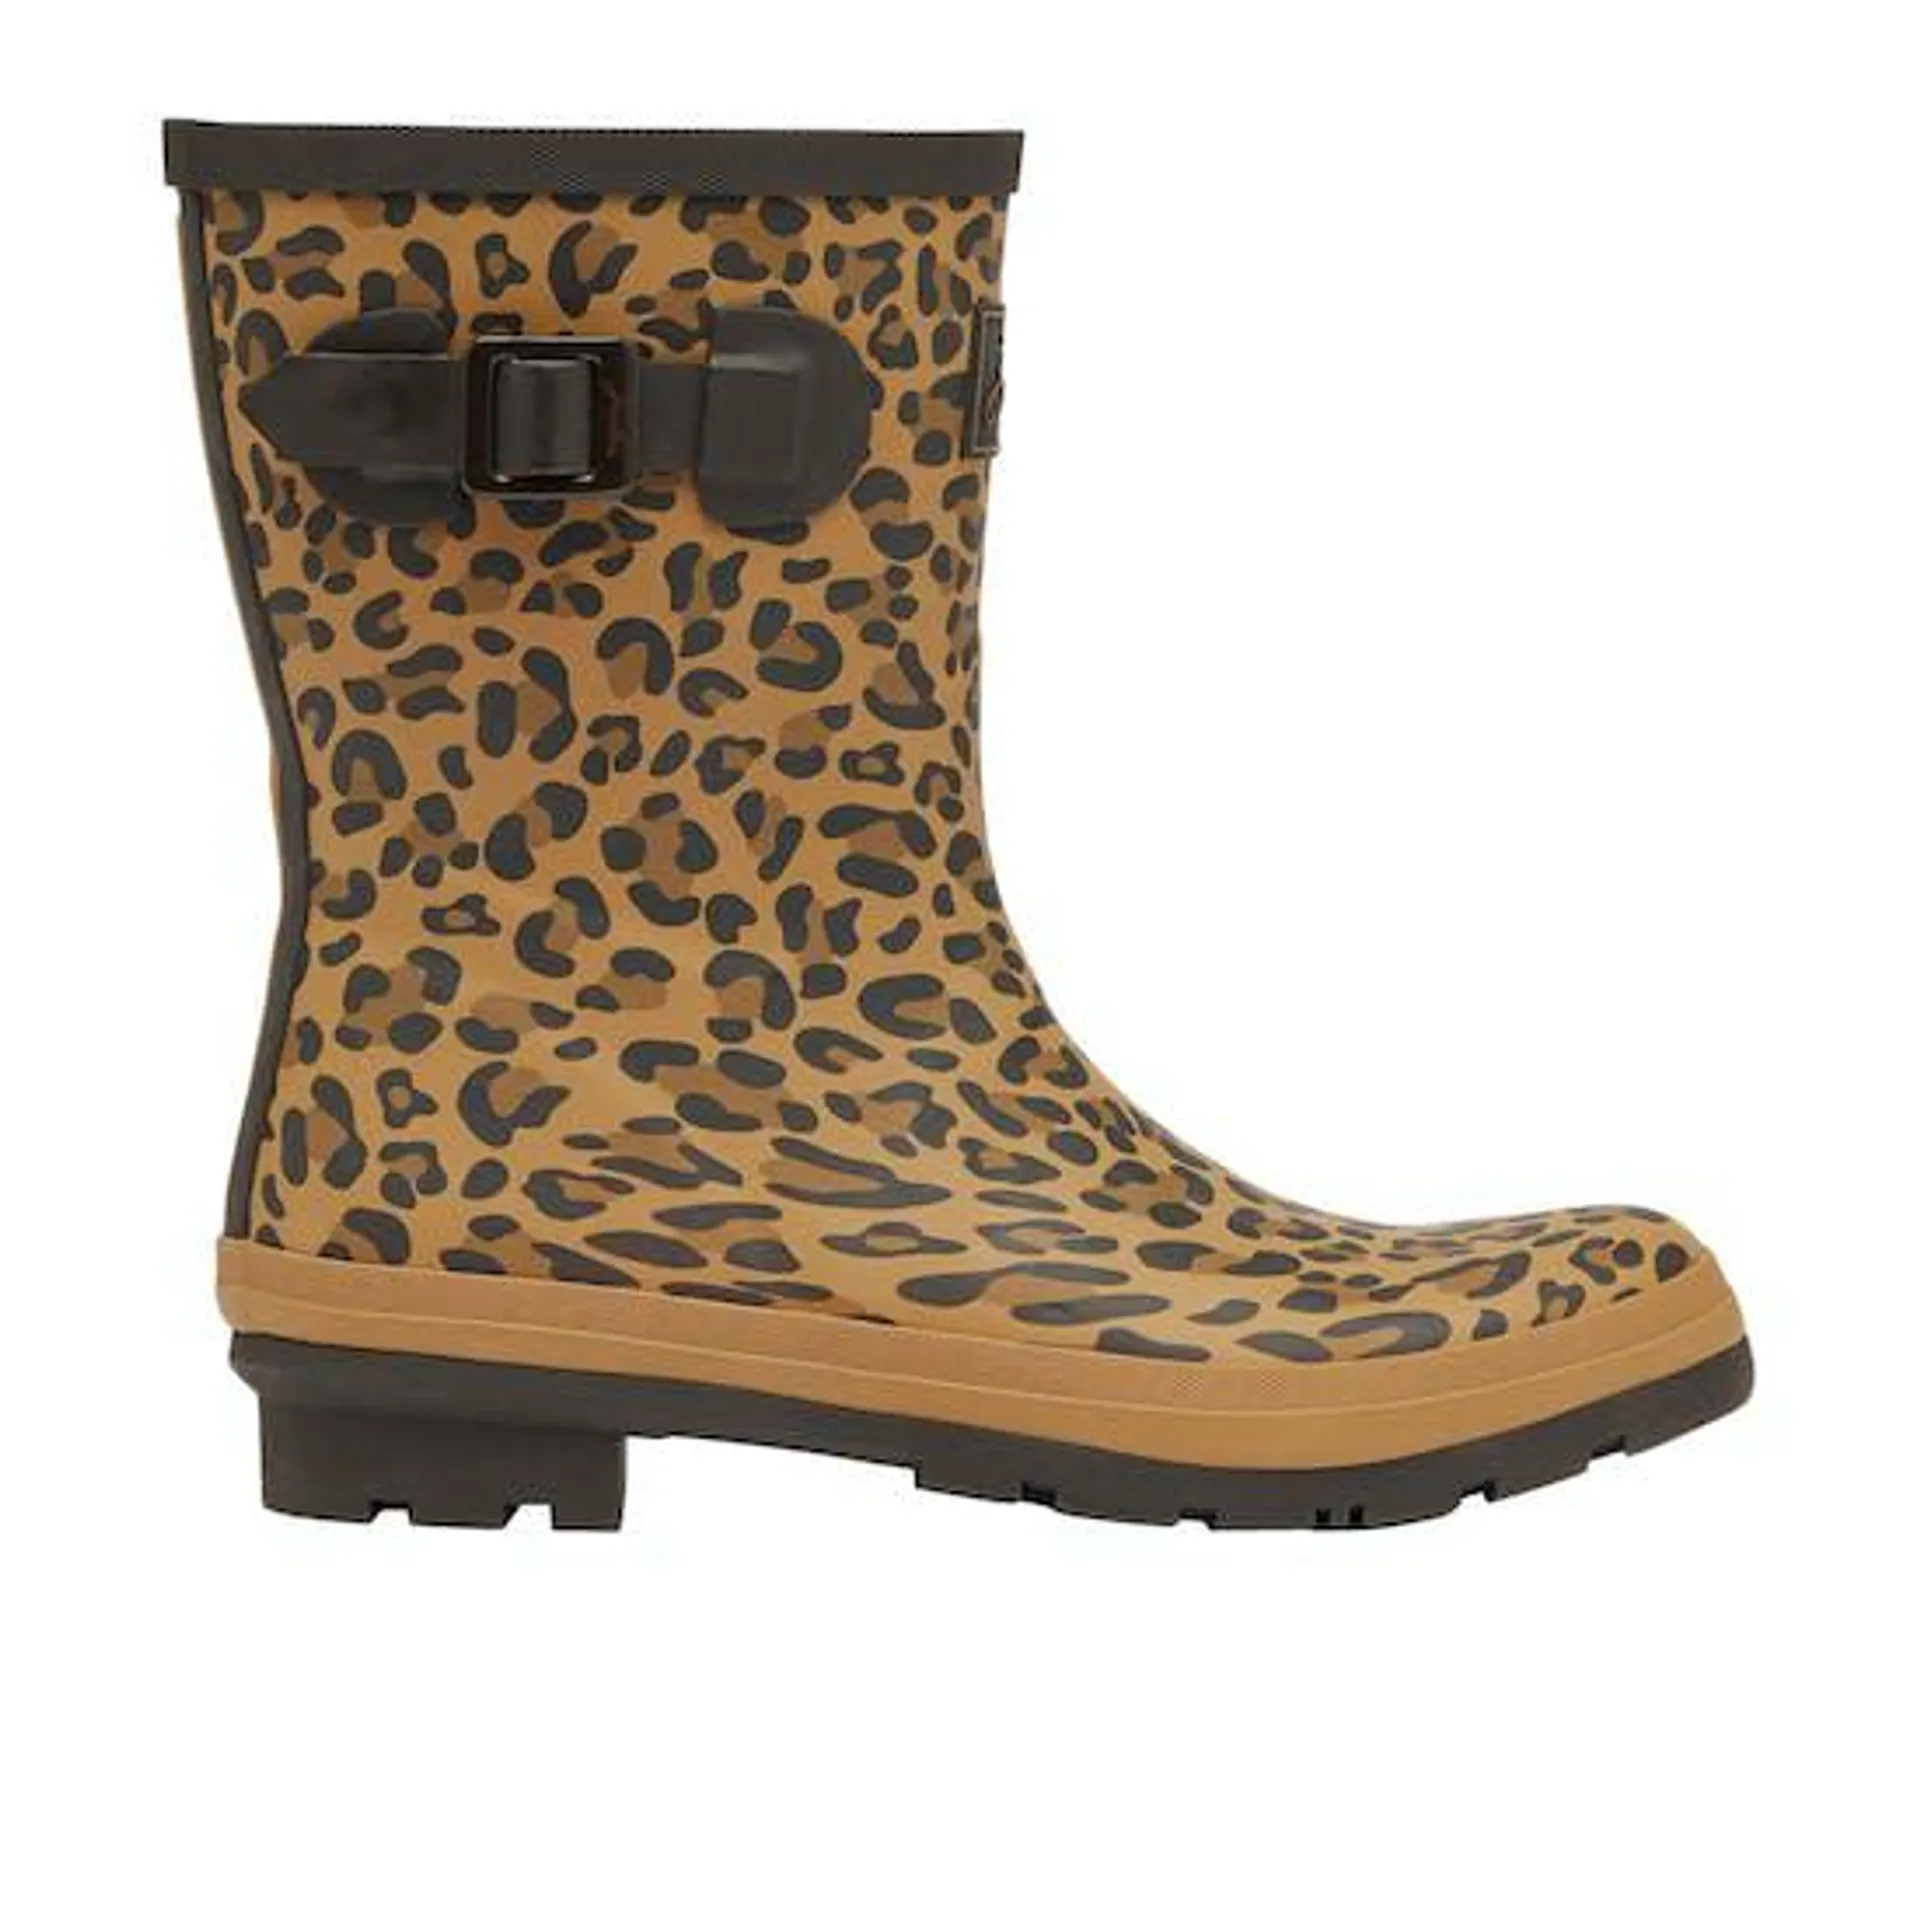 Joules Molly Welly Womens Wellies